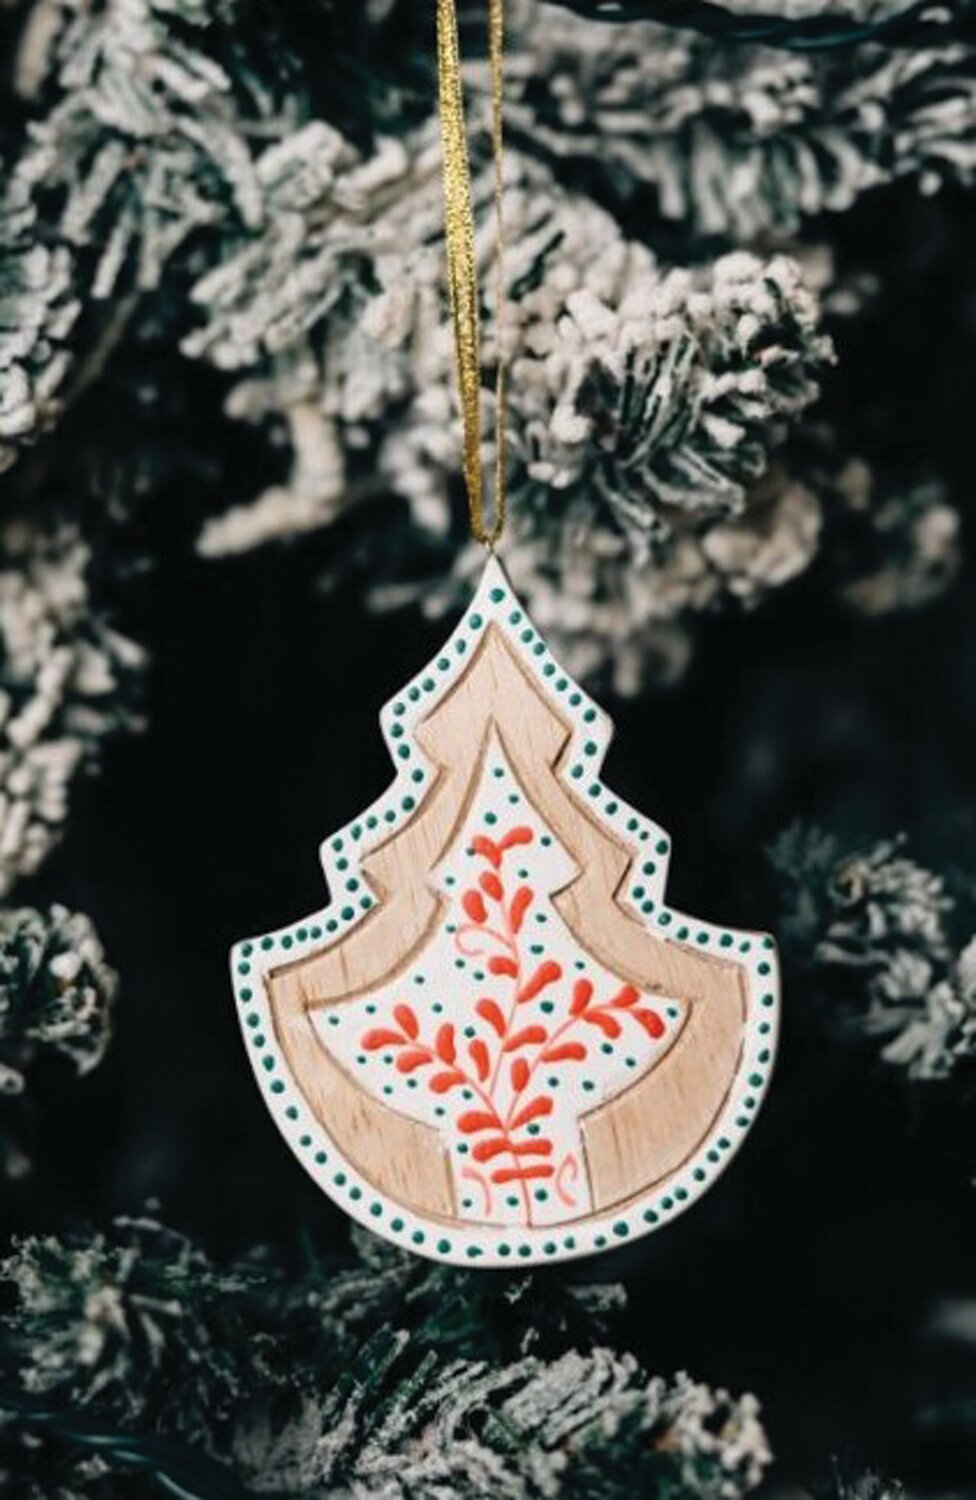 This handmade tree ornament is among the offerings at Ten Thousand Villages Souderton.